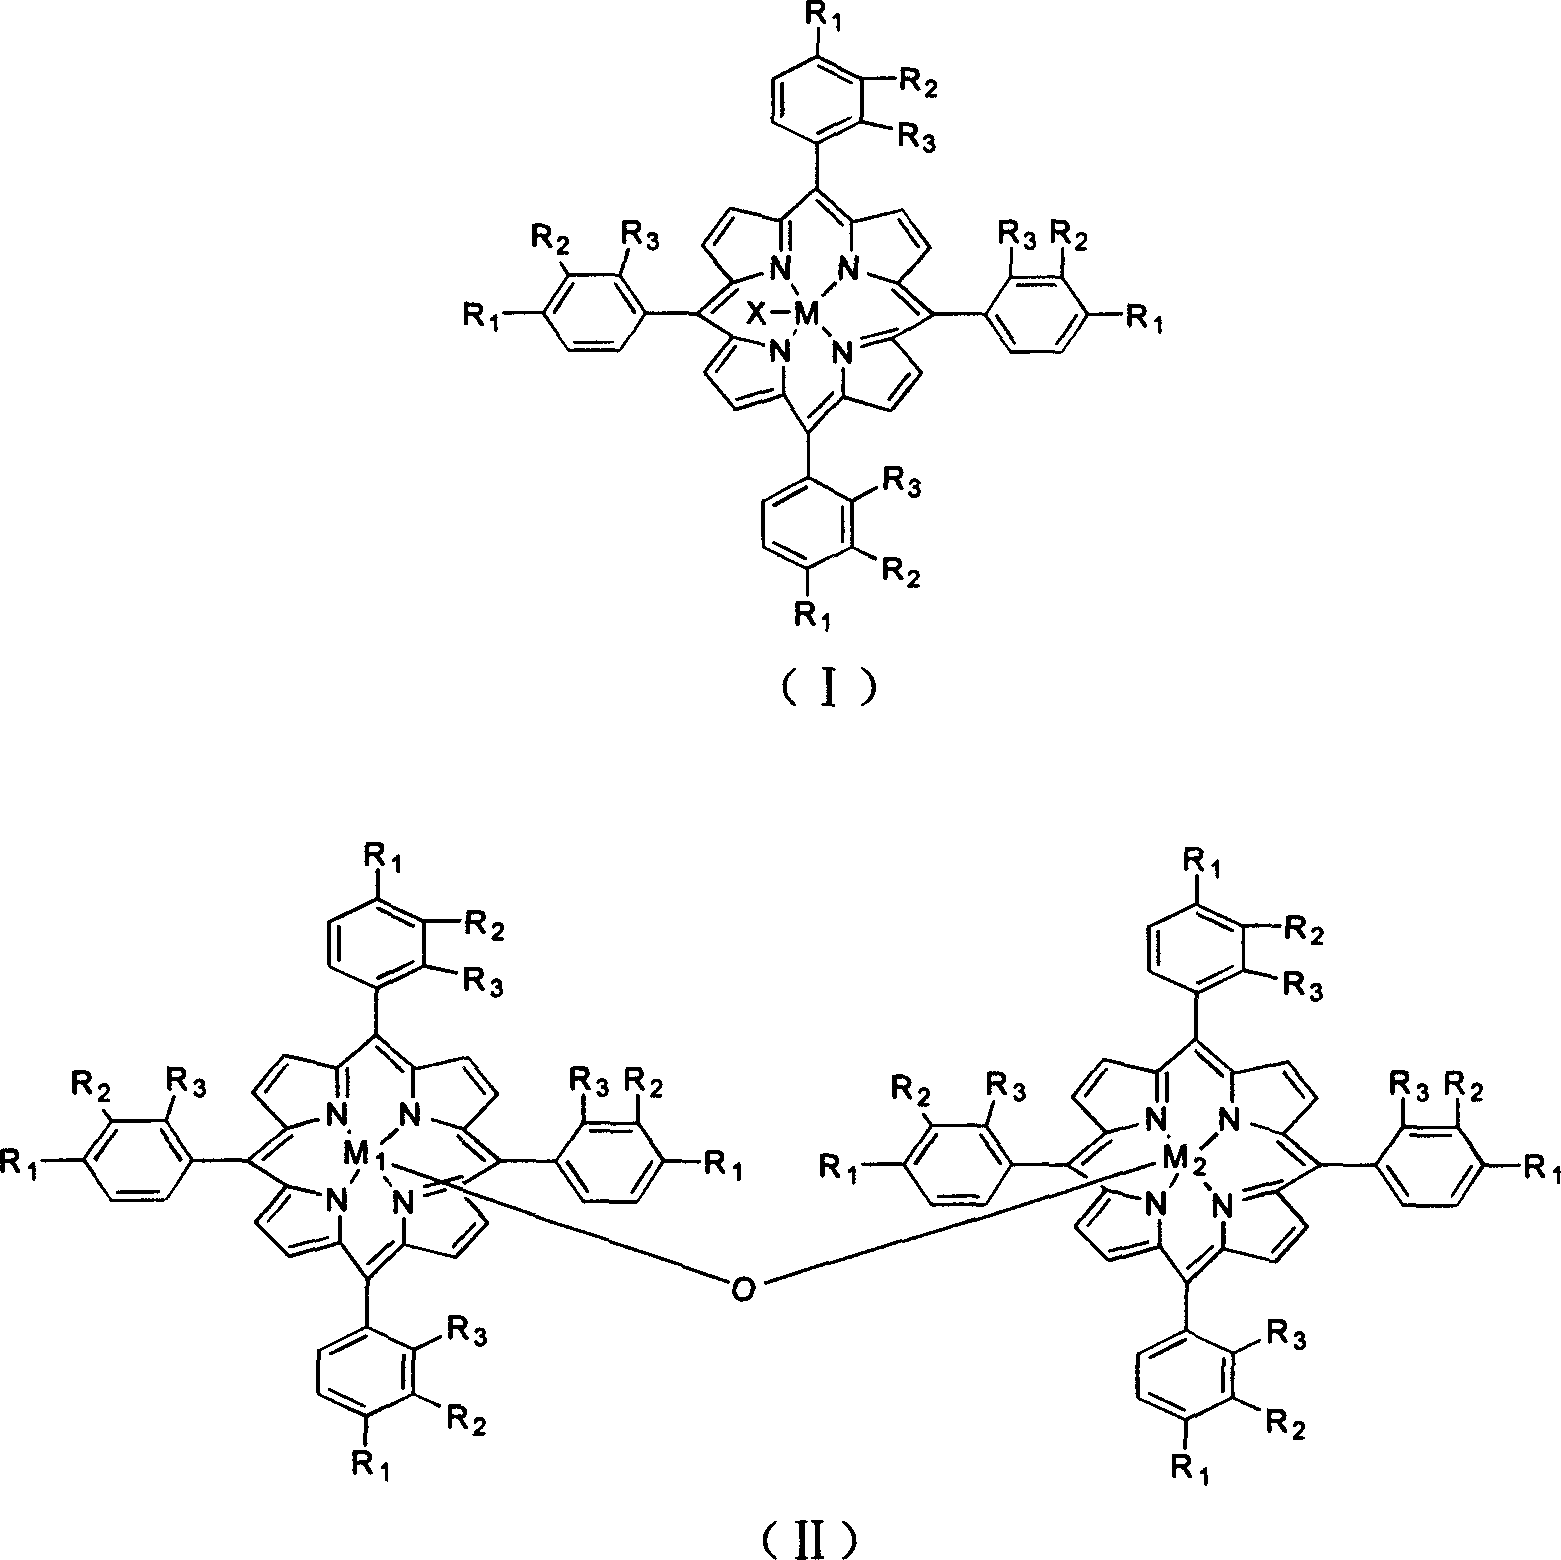 Technology and apparatus for preparing cyclohexanol, cyclohexanone and adipic acid by cyclohexane